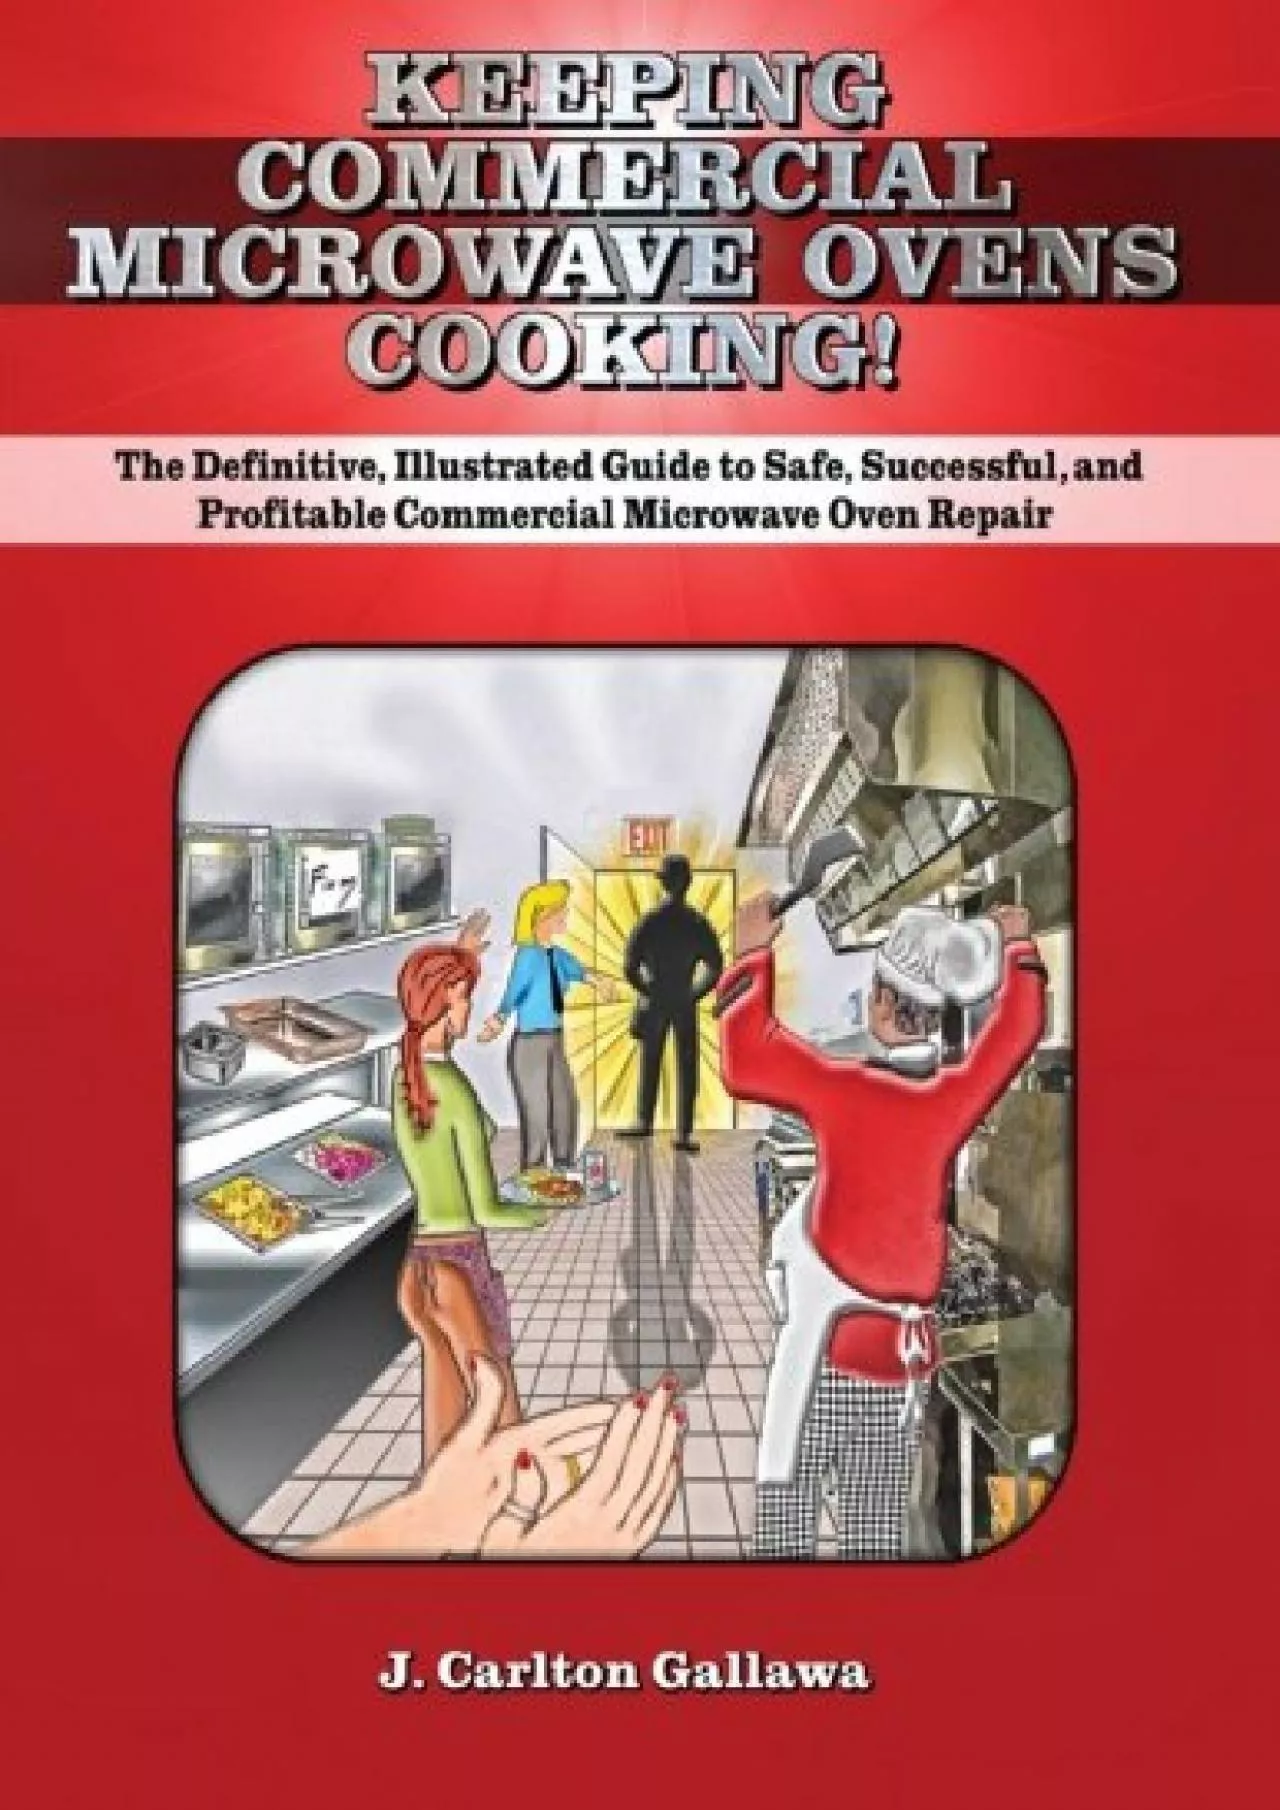 [DOWNLOAD] Keeping Commercial Microwave Ovens Cooking: The Definitive, Illustrated Guide